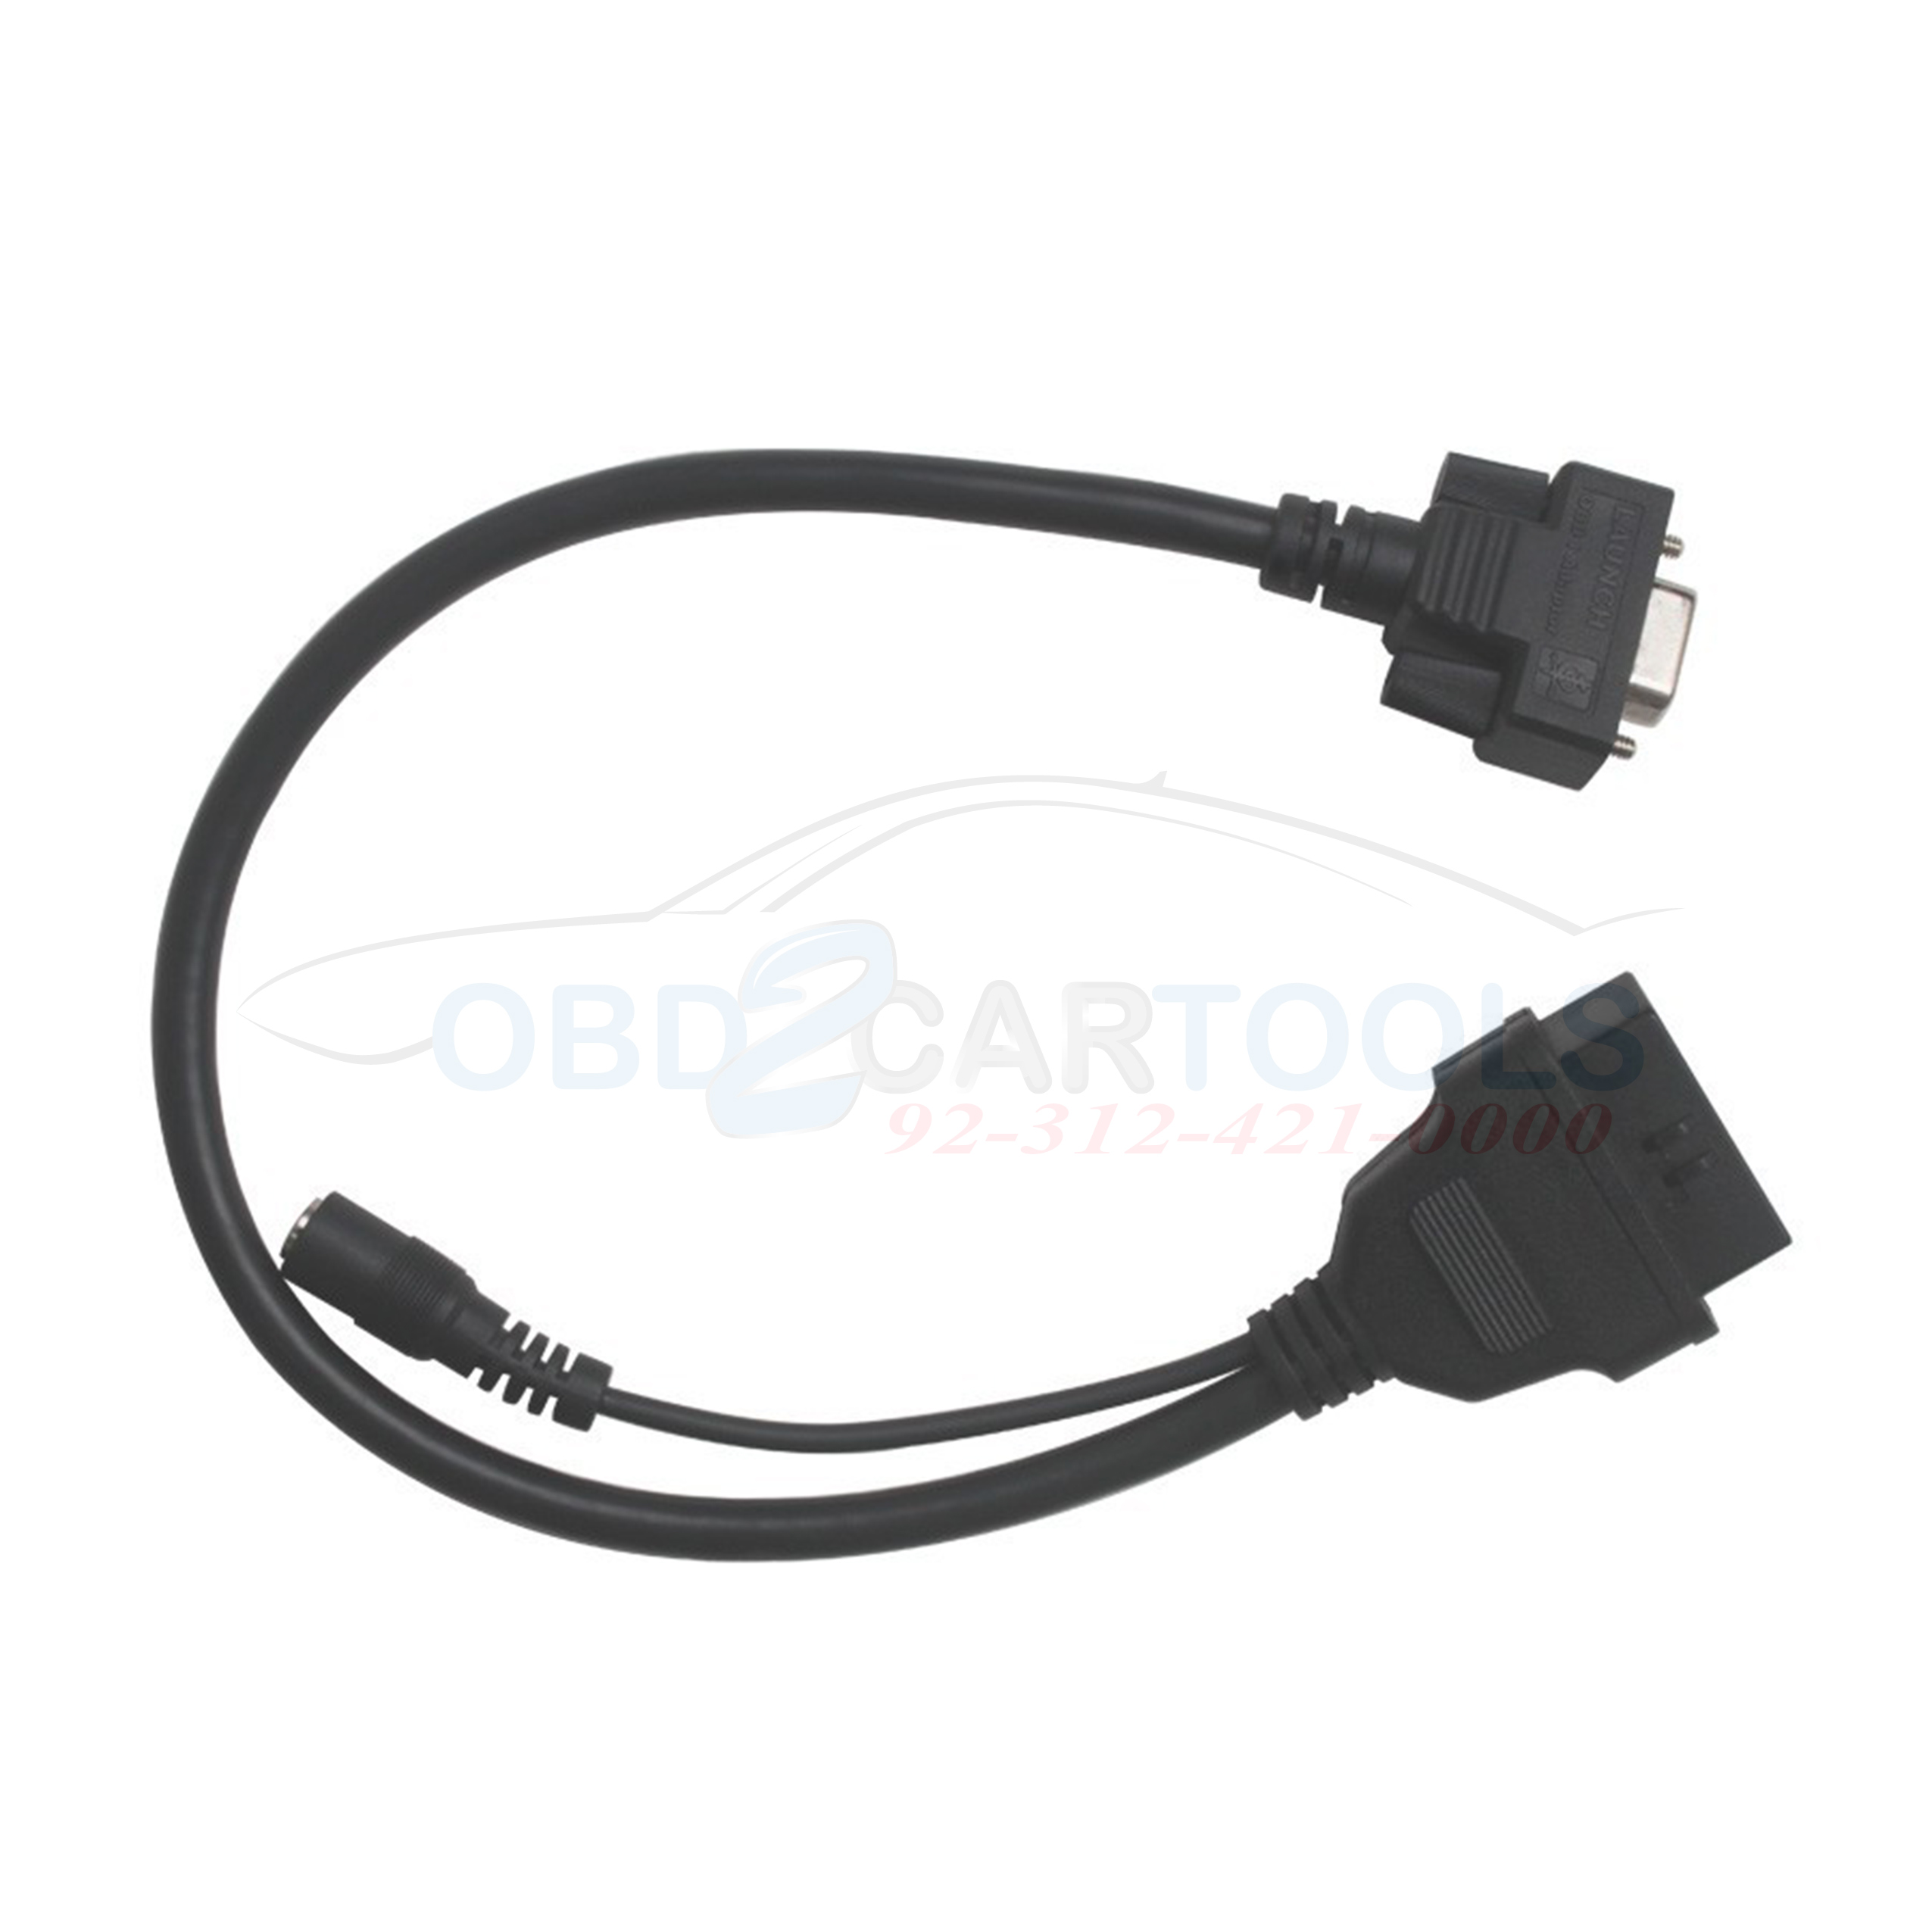 Product image for Launch X431 Adapter Connector Switch Cable